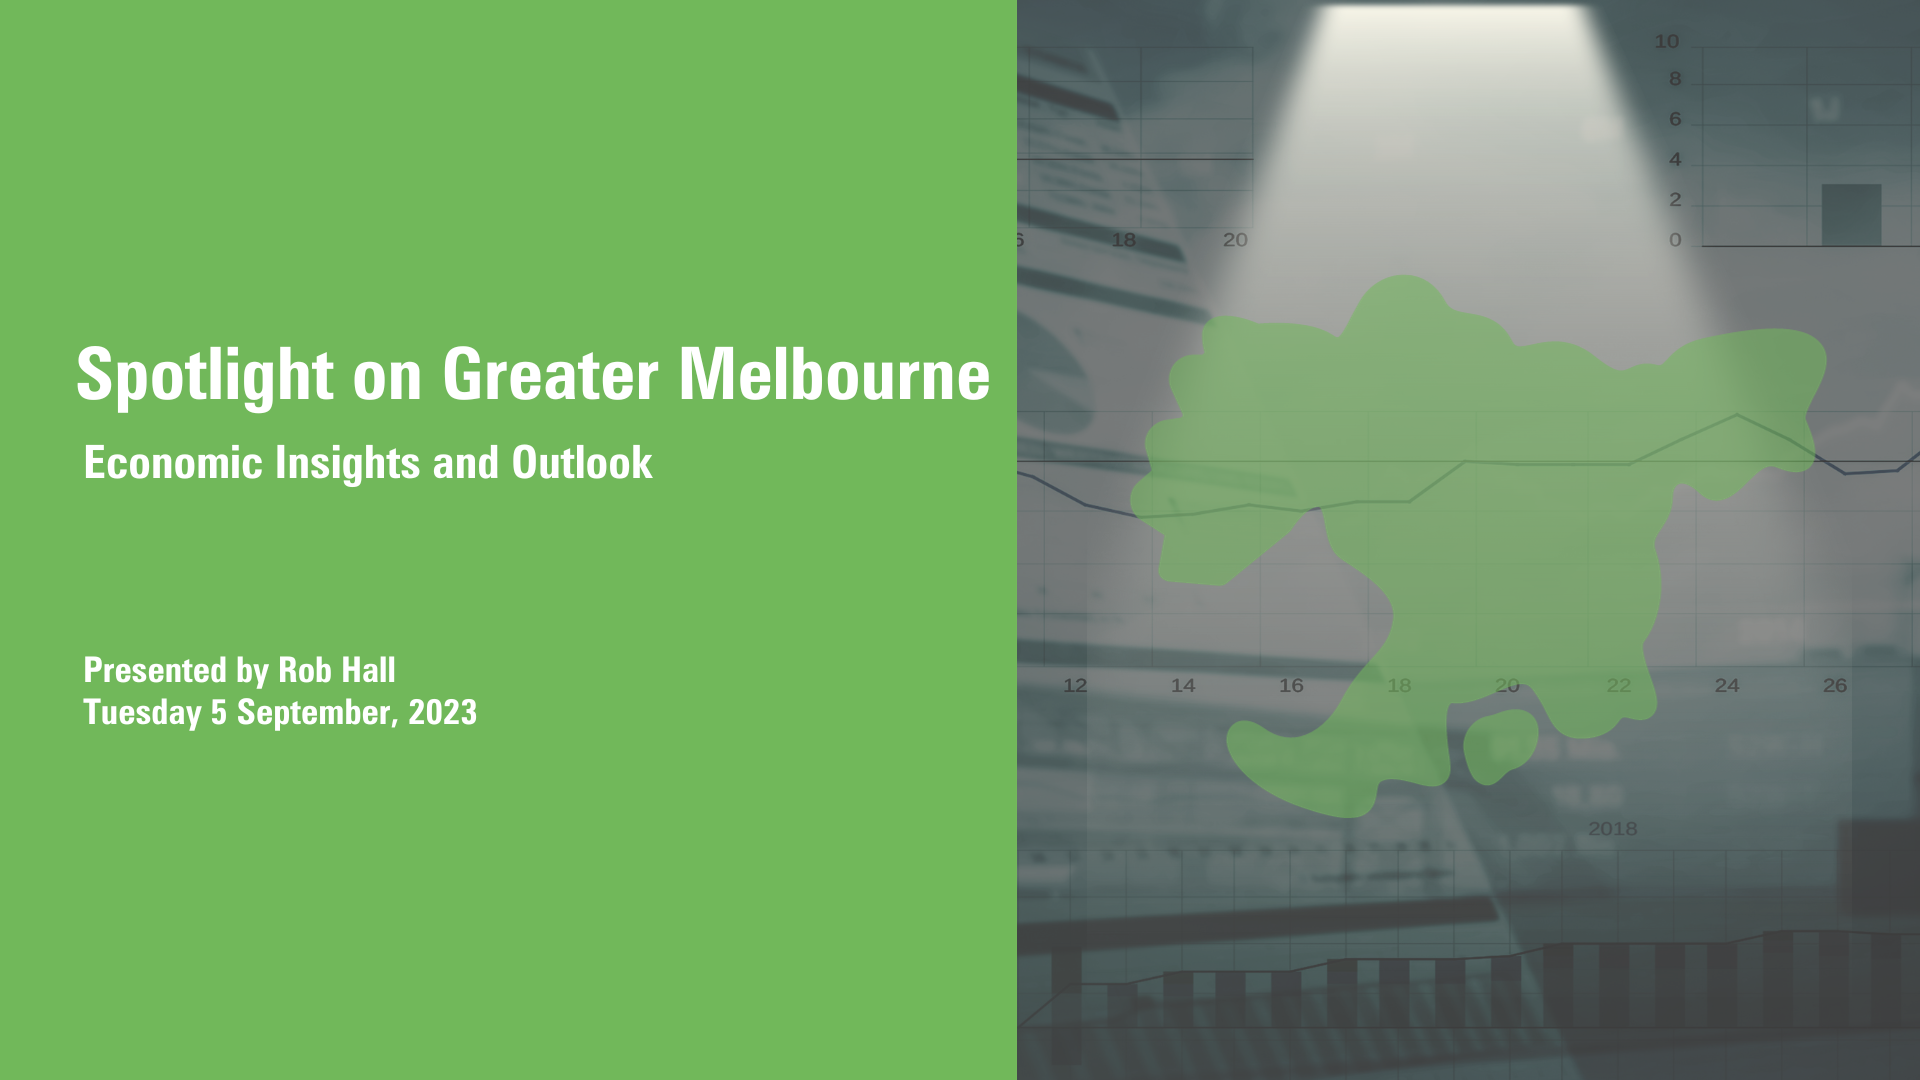 Spotlight on Greater Melbourne - Economic Insights and Outlook